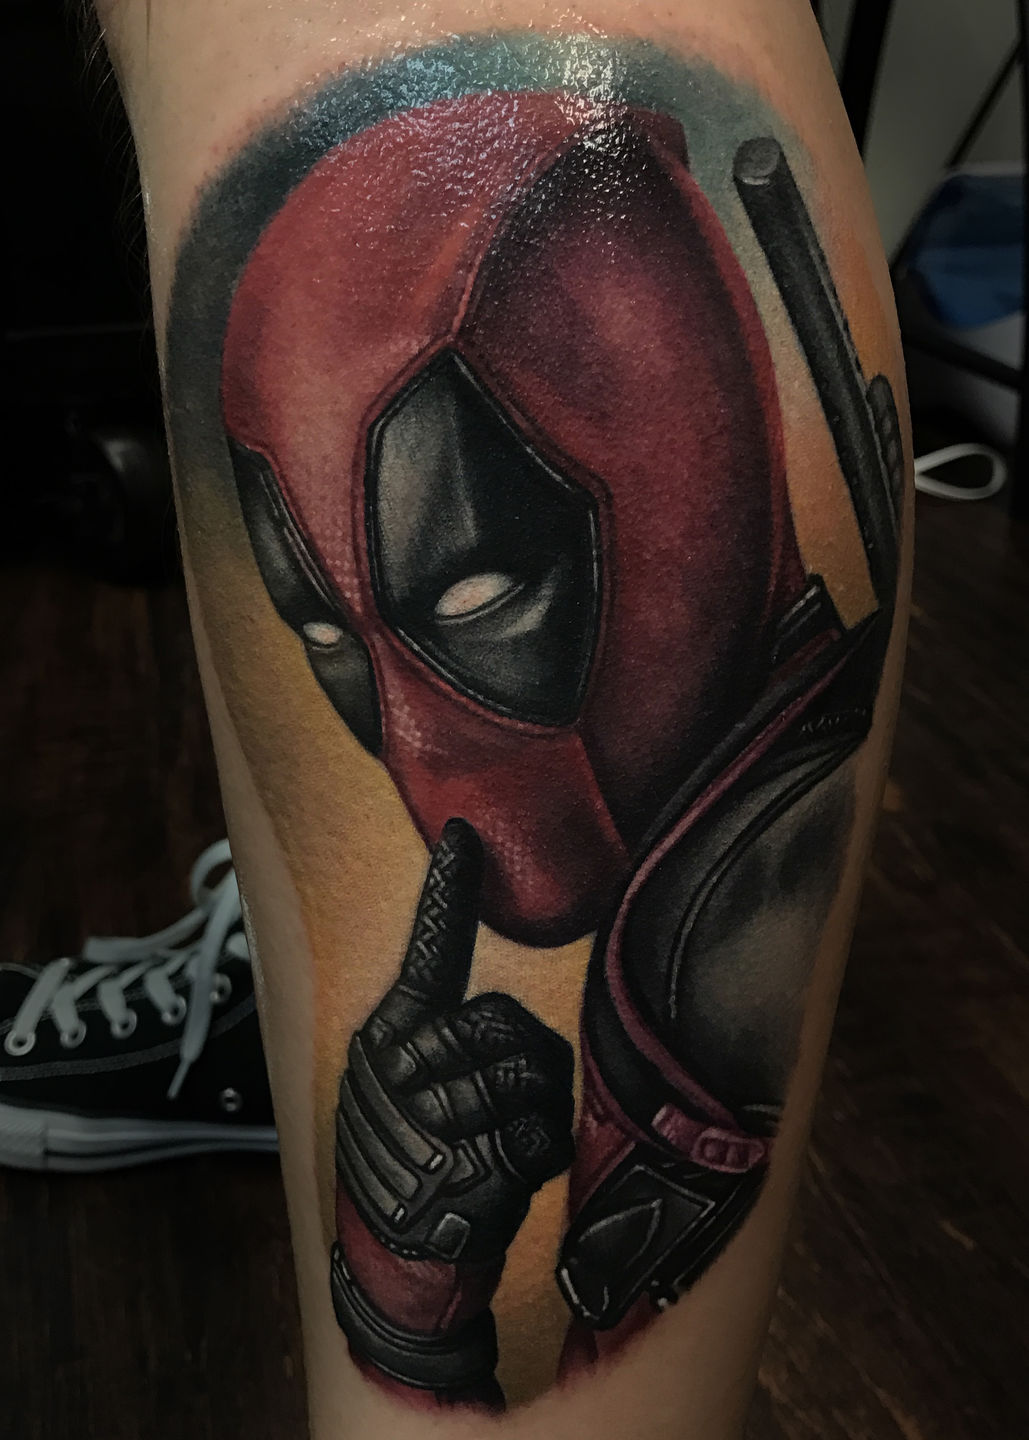 Dark Side Tattoo Collective on Instagram Captain Deadpool No just  Deadpool A piece by Jacques BookingsEnquiries  082 966 8985 WhatsApp  africanvoodoo420 tattoo tattoos tattoosofinstagram ink inked  inktattoo tattooart tattooartist 